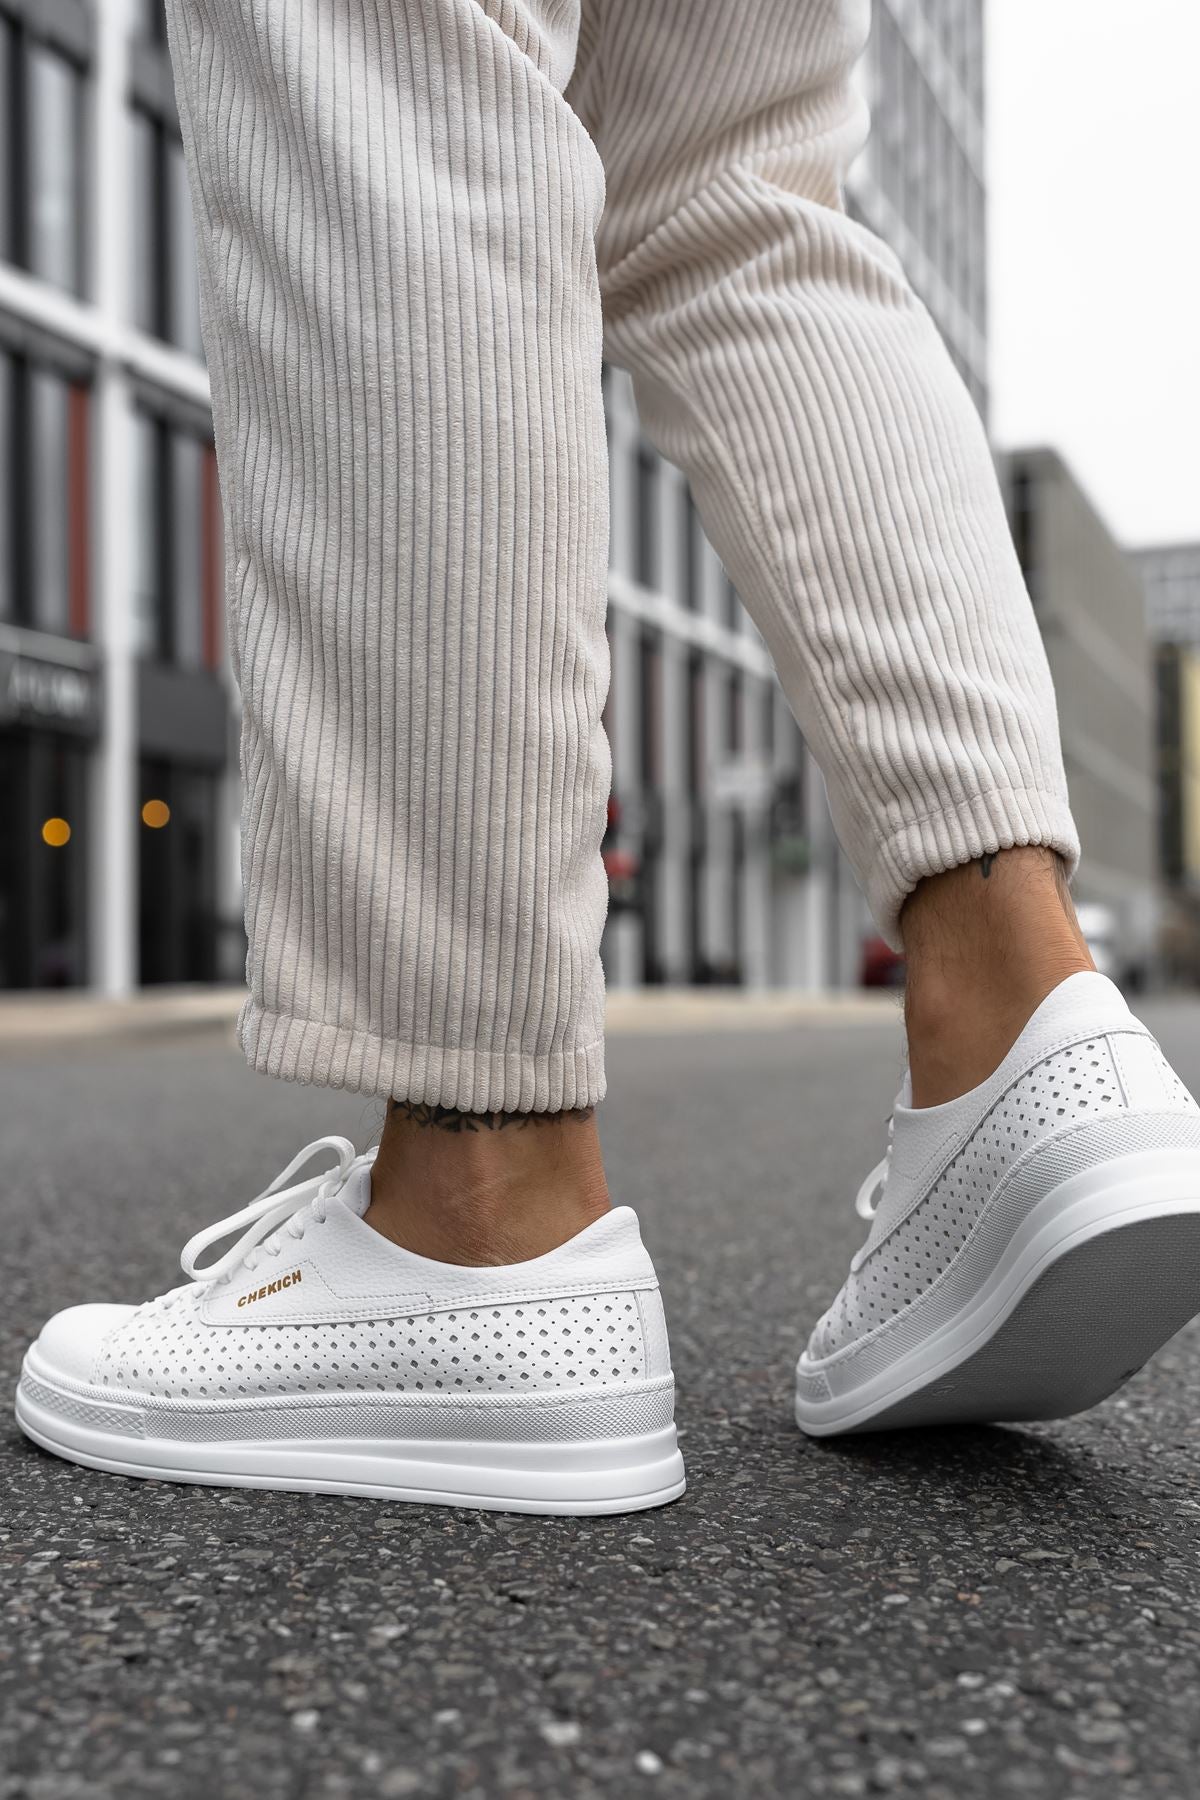 CH043 Men's Unisex Full White Casual Shoes - STREETMODE ™